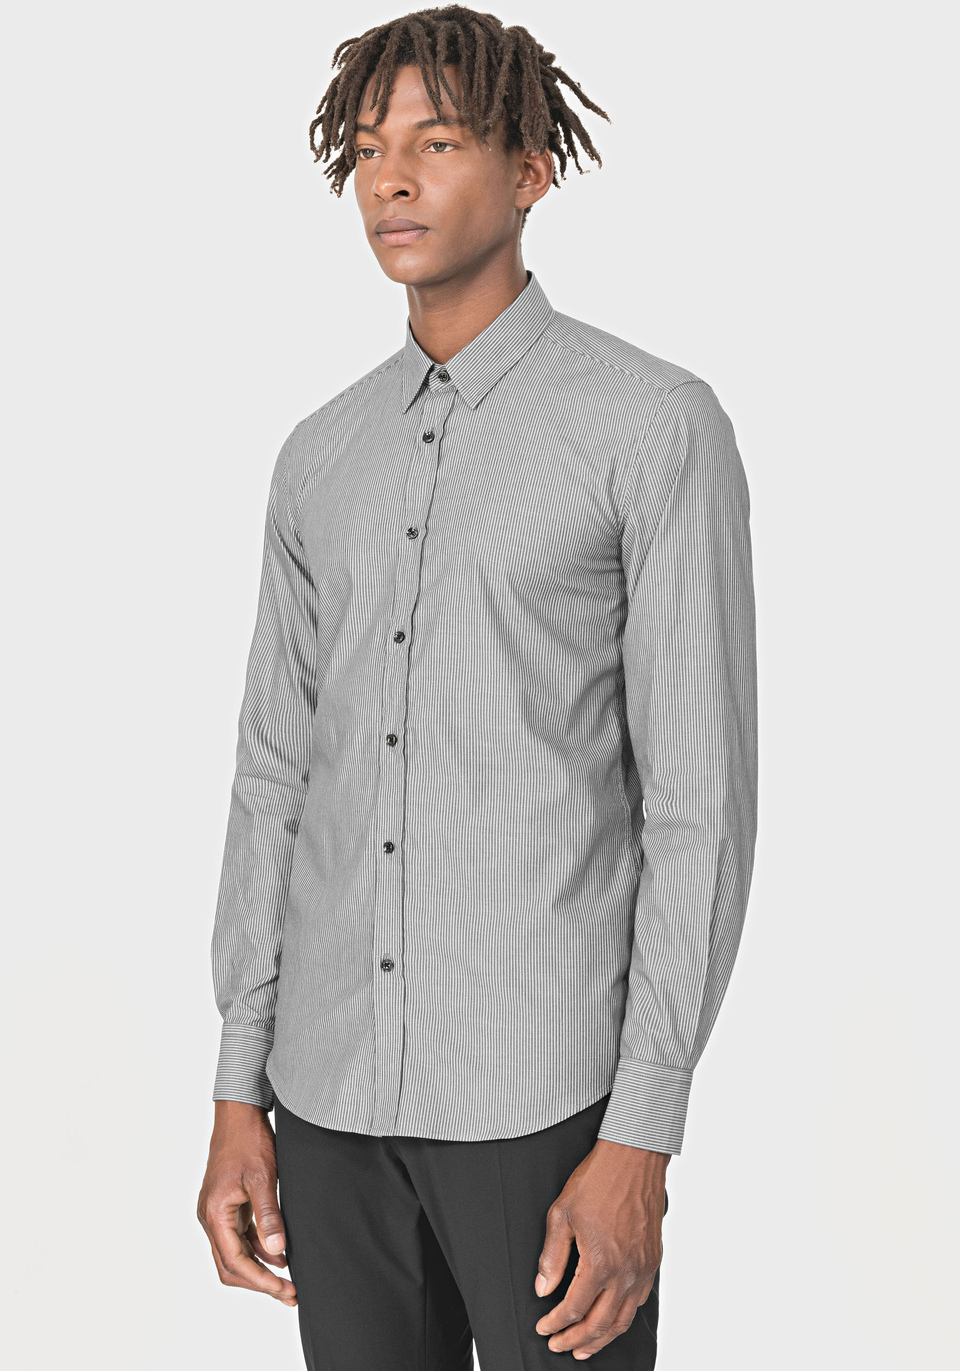 SLIM-FIT SHIRT IN 100% SOFT COTTON WITH FINE VERTICAL STRIPES - Antony Morato Online Shop